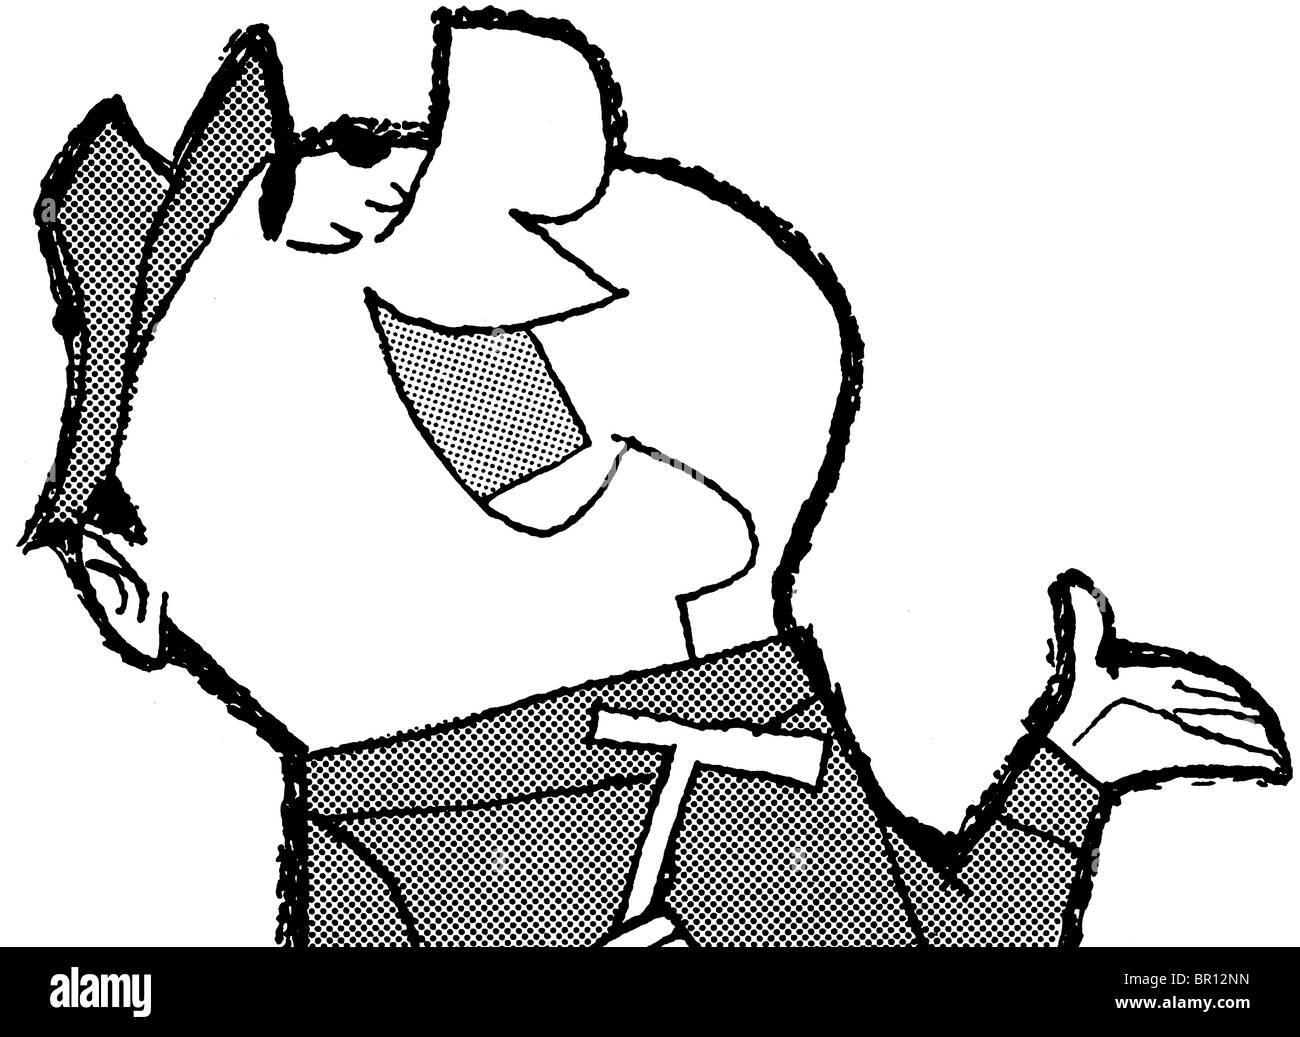 A black and white version of a cartoon style drawing of a happy character Stock Photo